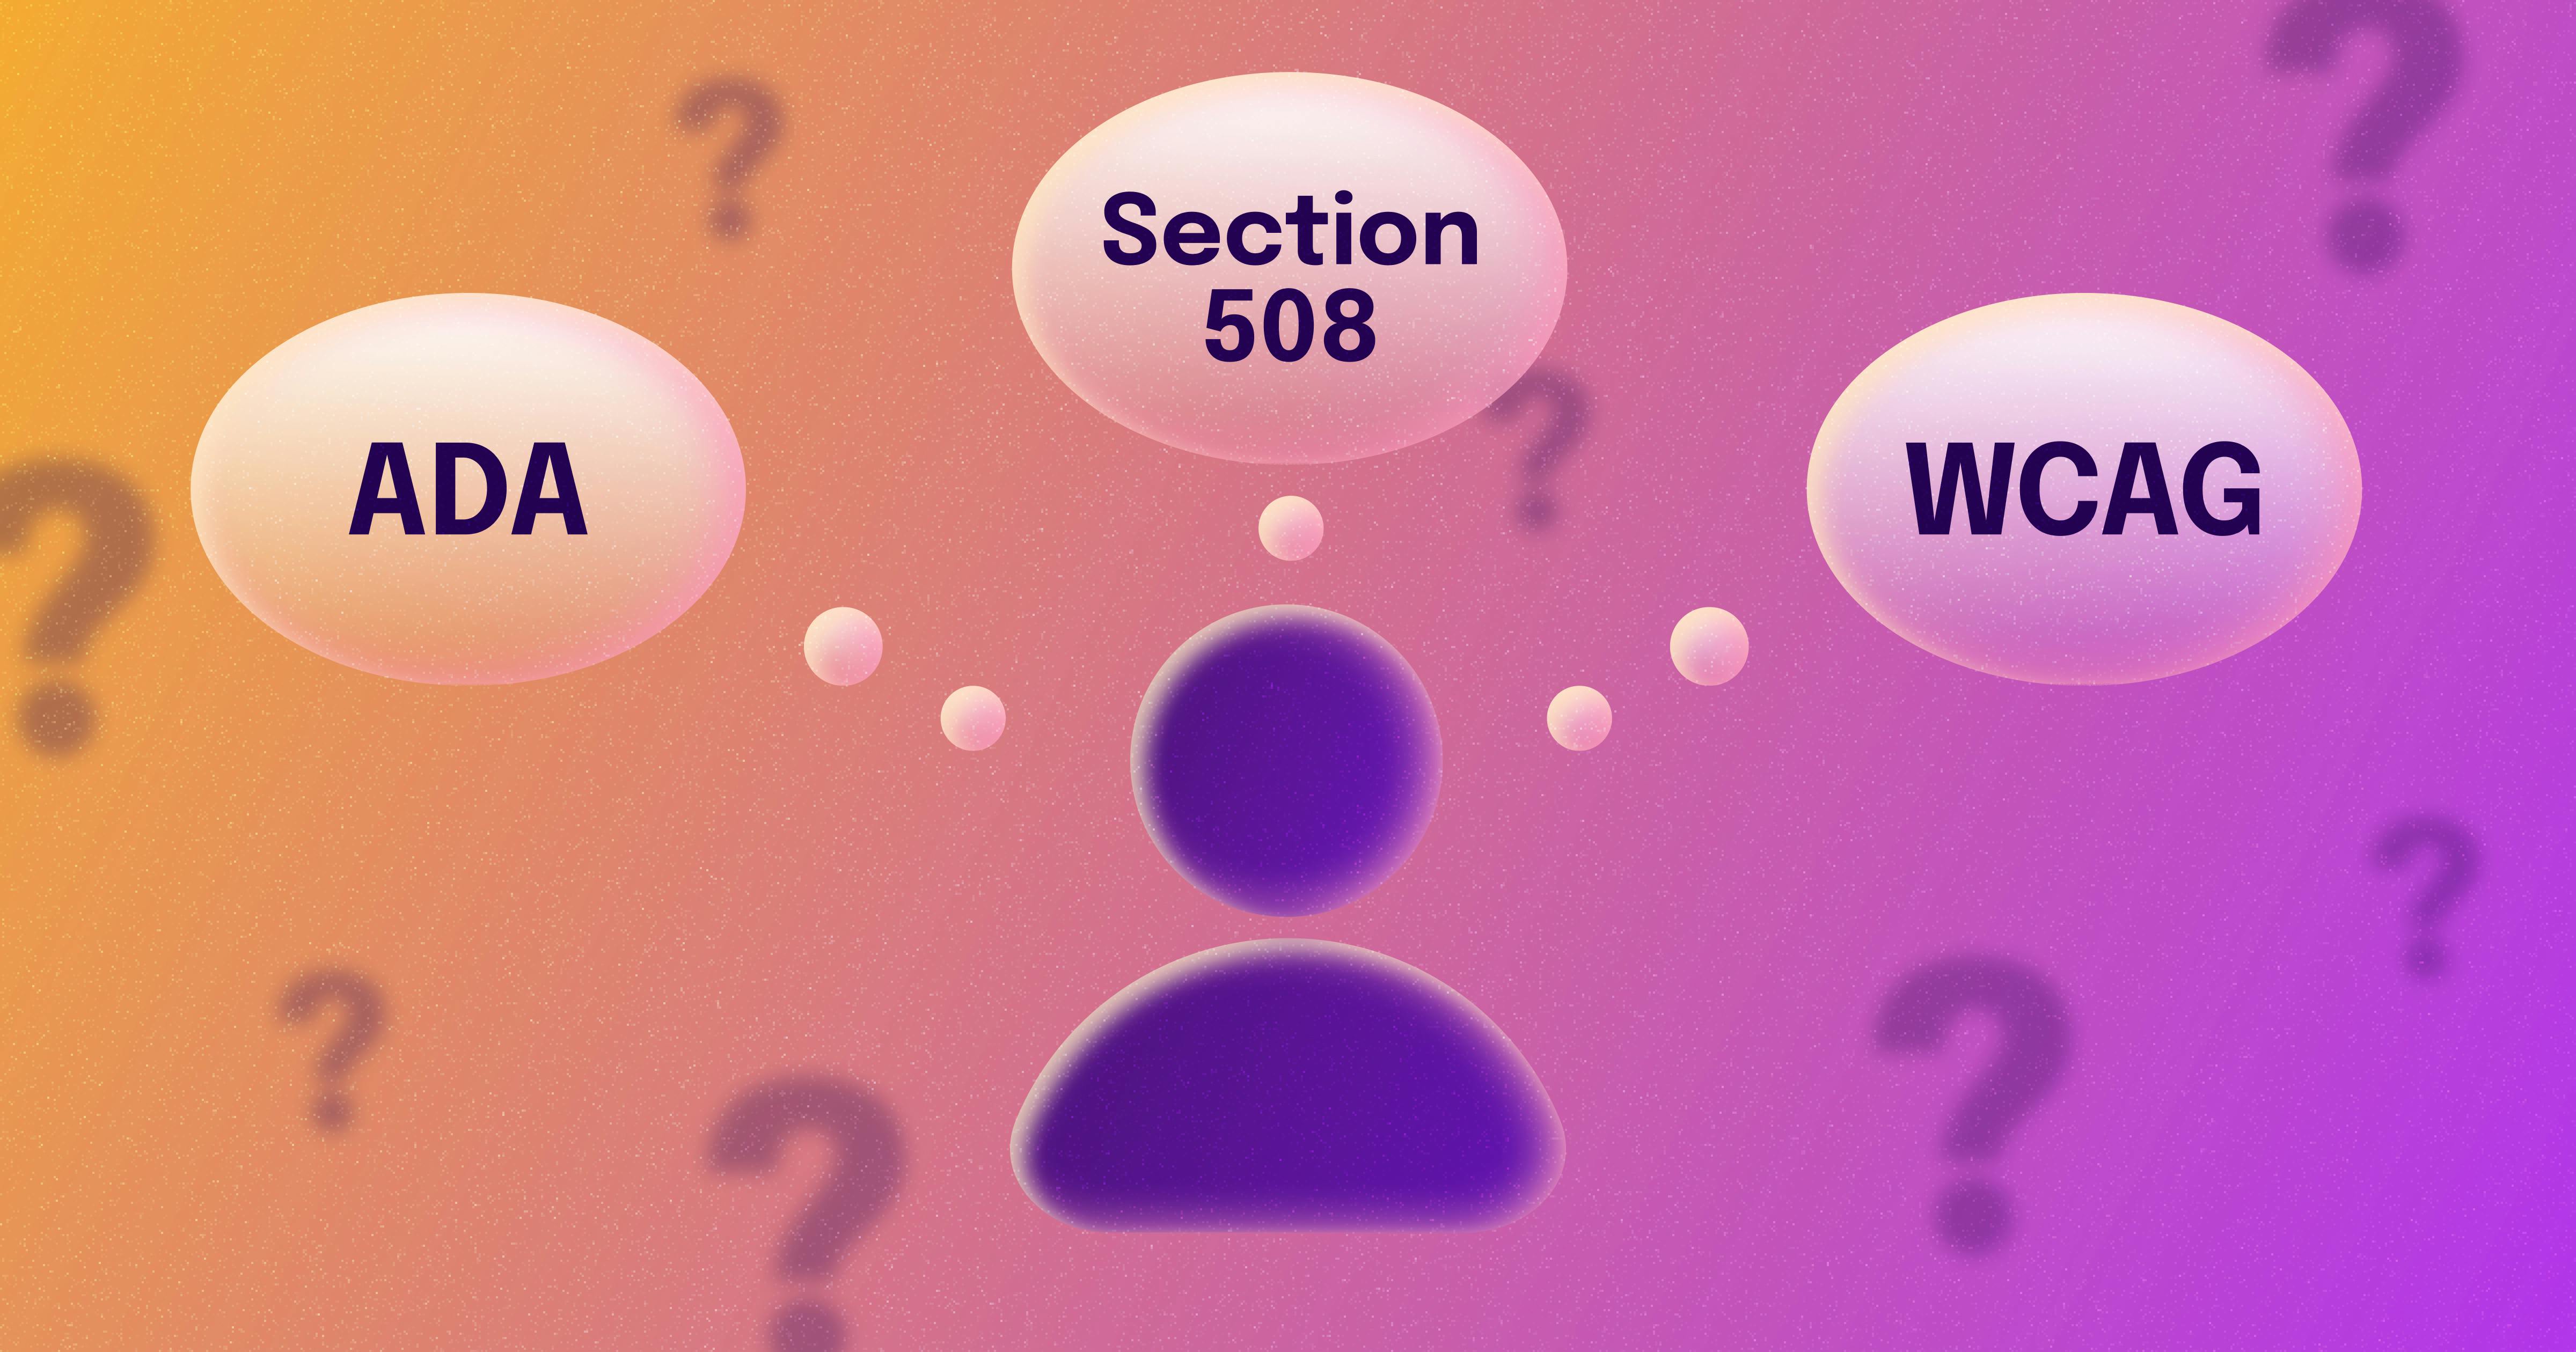 An icon of a person, surrounded by three thought bubbles. The first says "ADA," the second says "Section 508," and the third says "WCAG." In the background, there is a repeating pattern of question marks